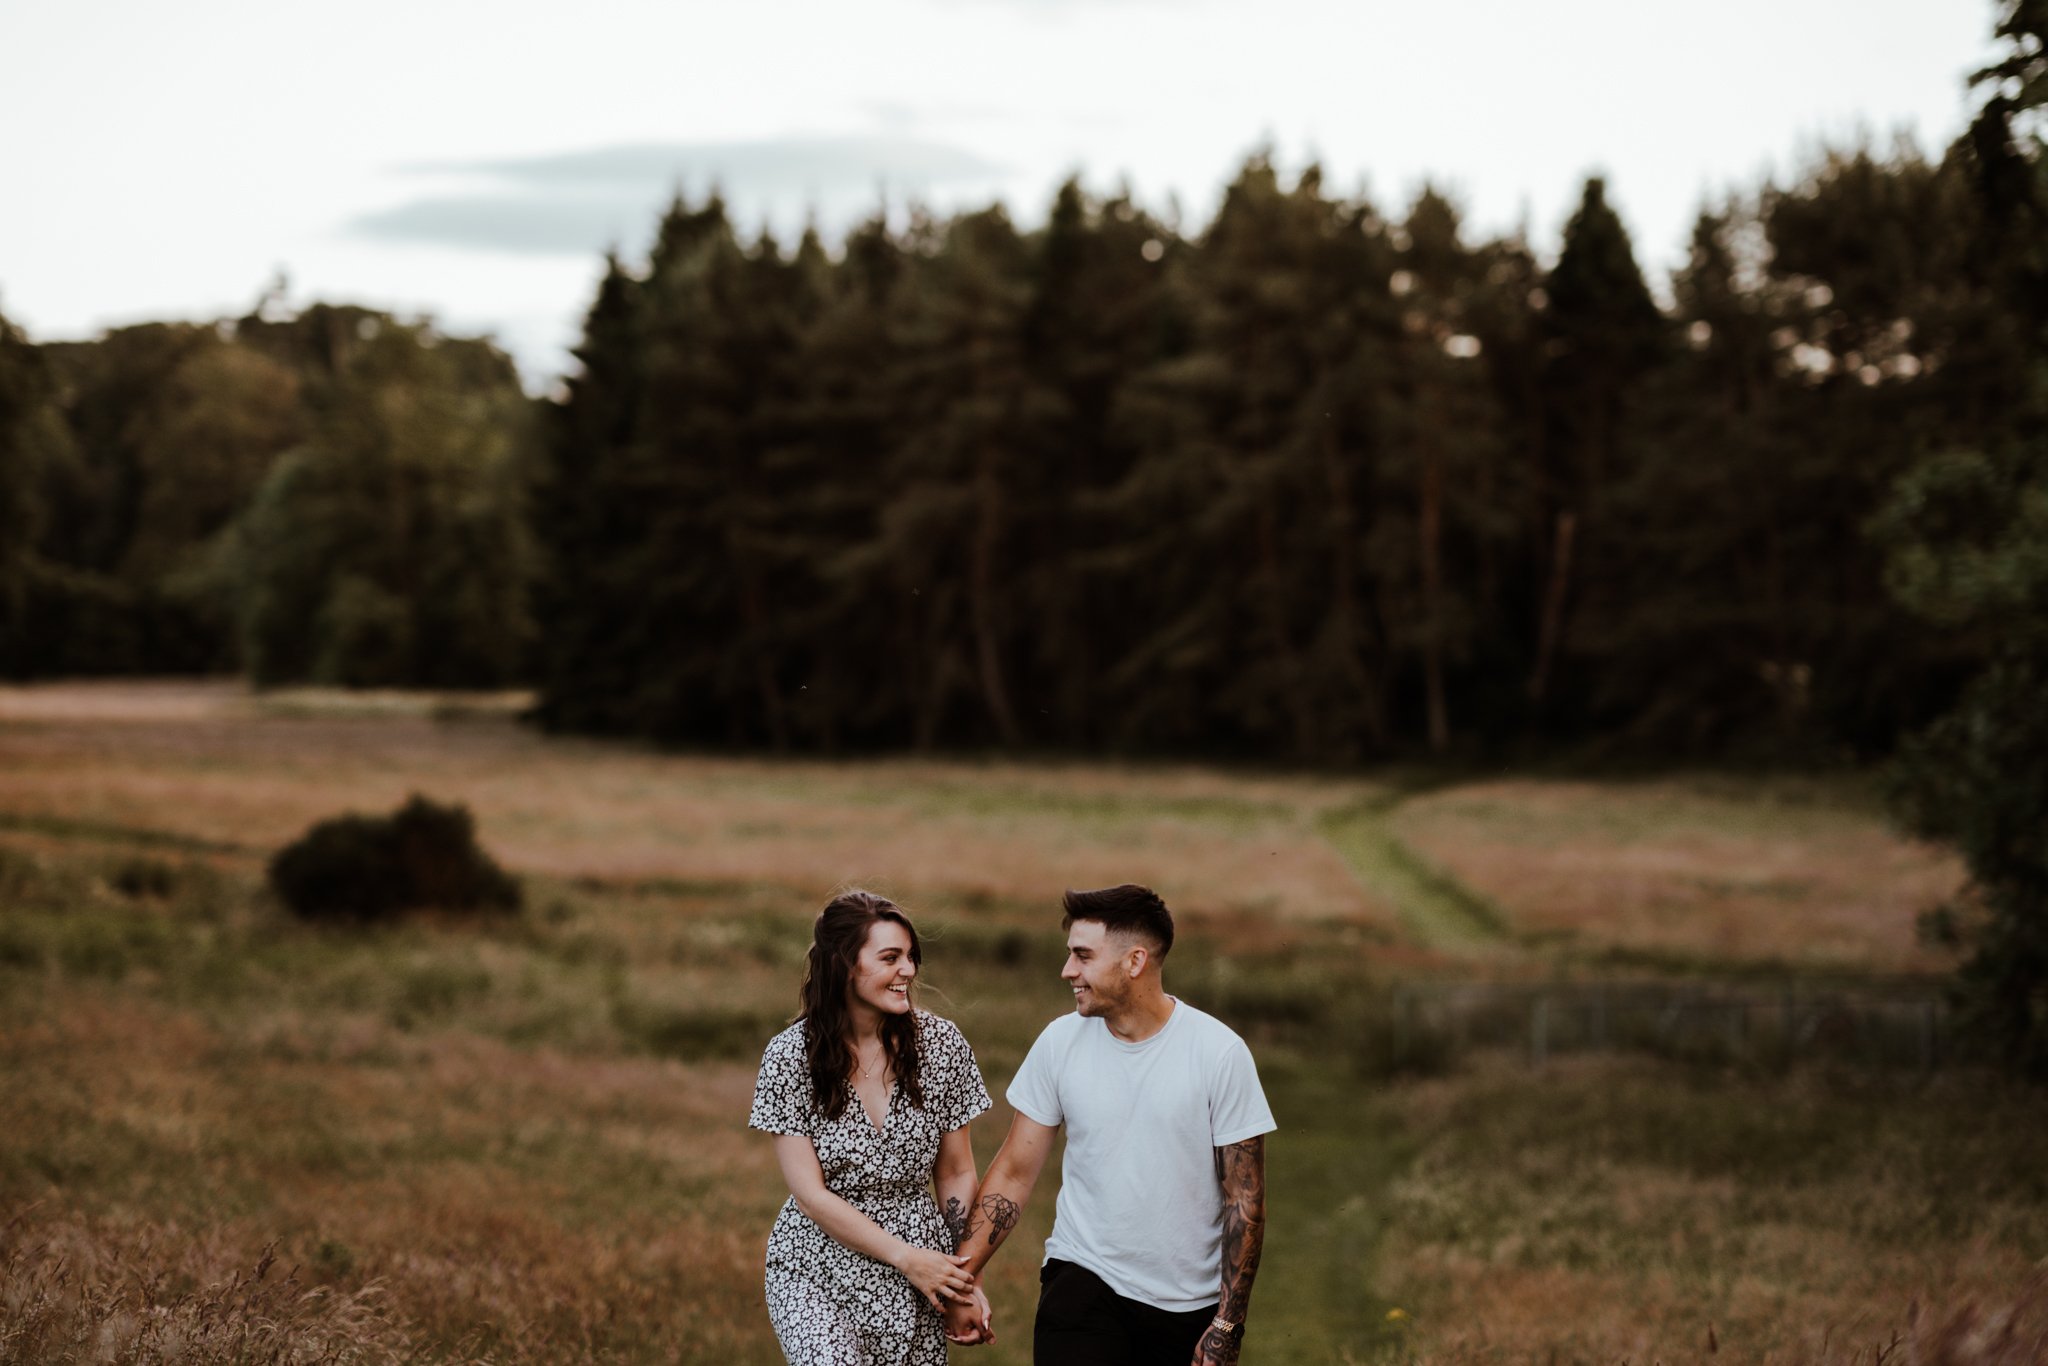 Angus Scotland Engagement and Wedding Photographer - Emily and Gabriel - Adventure Couple Session83.jpg